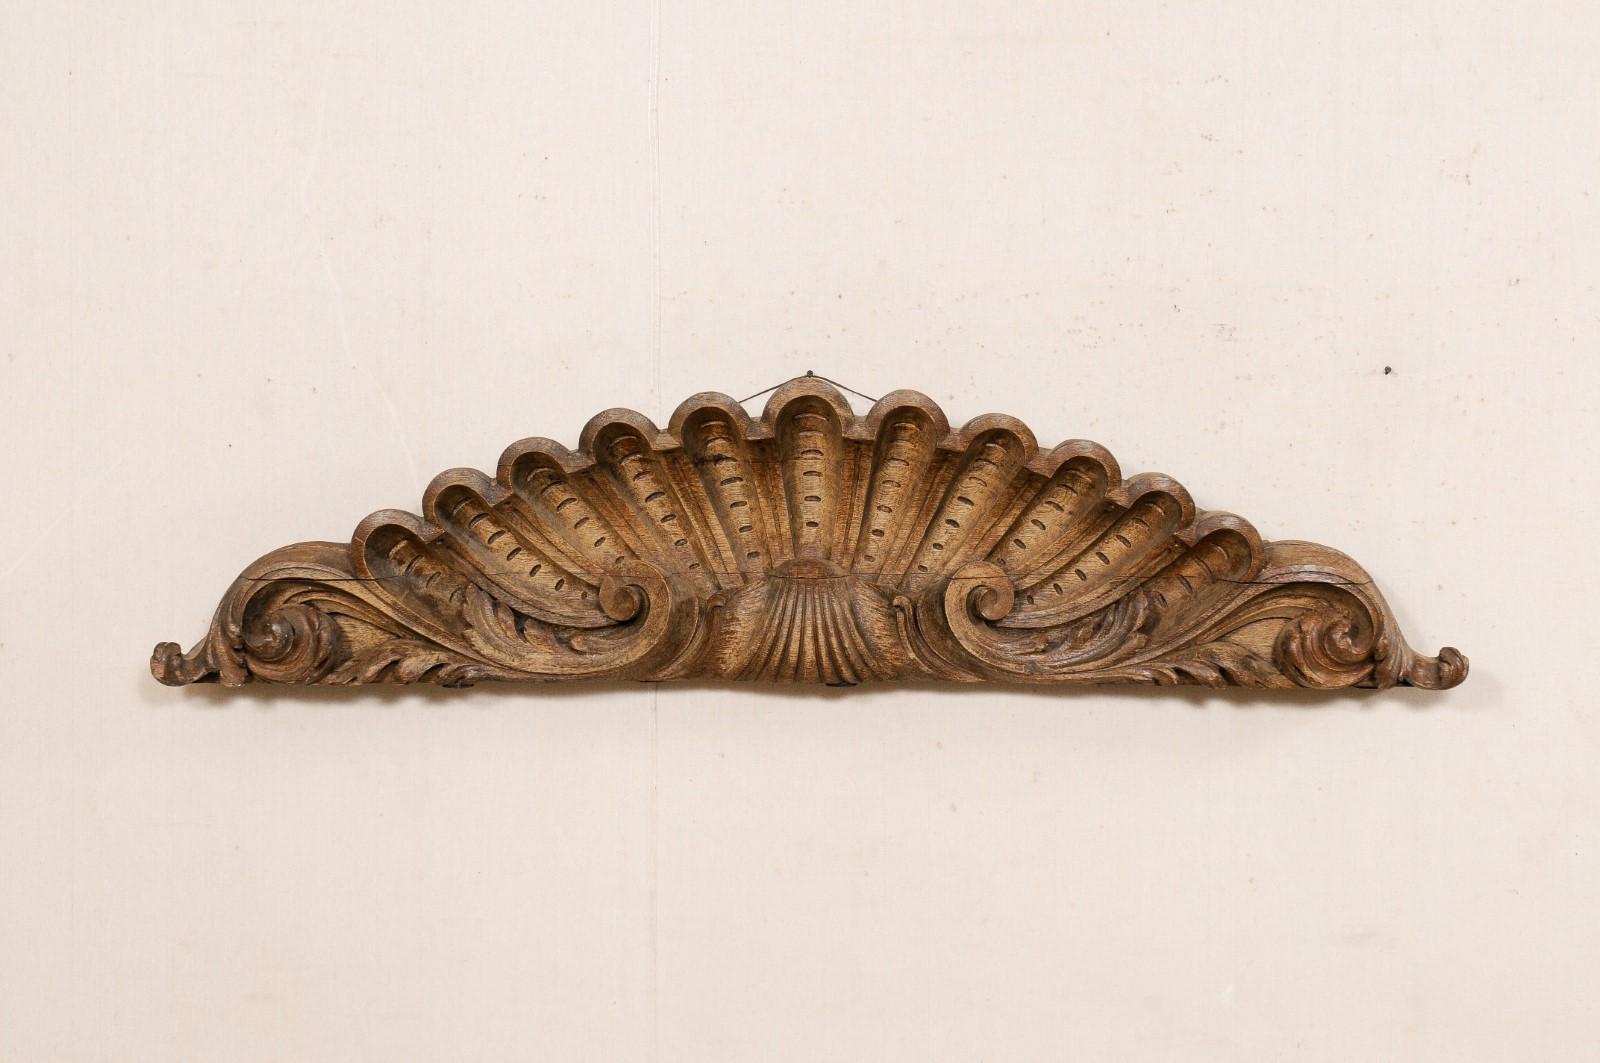 A French carved wood wall fragment from the 19th century. This antique wall decoration from France has been hand-carved, resembling a shell with an elaborate scallop-shaped top with scrolling acanthus leaves flanking either far side. This plaque has